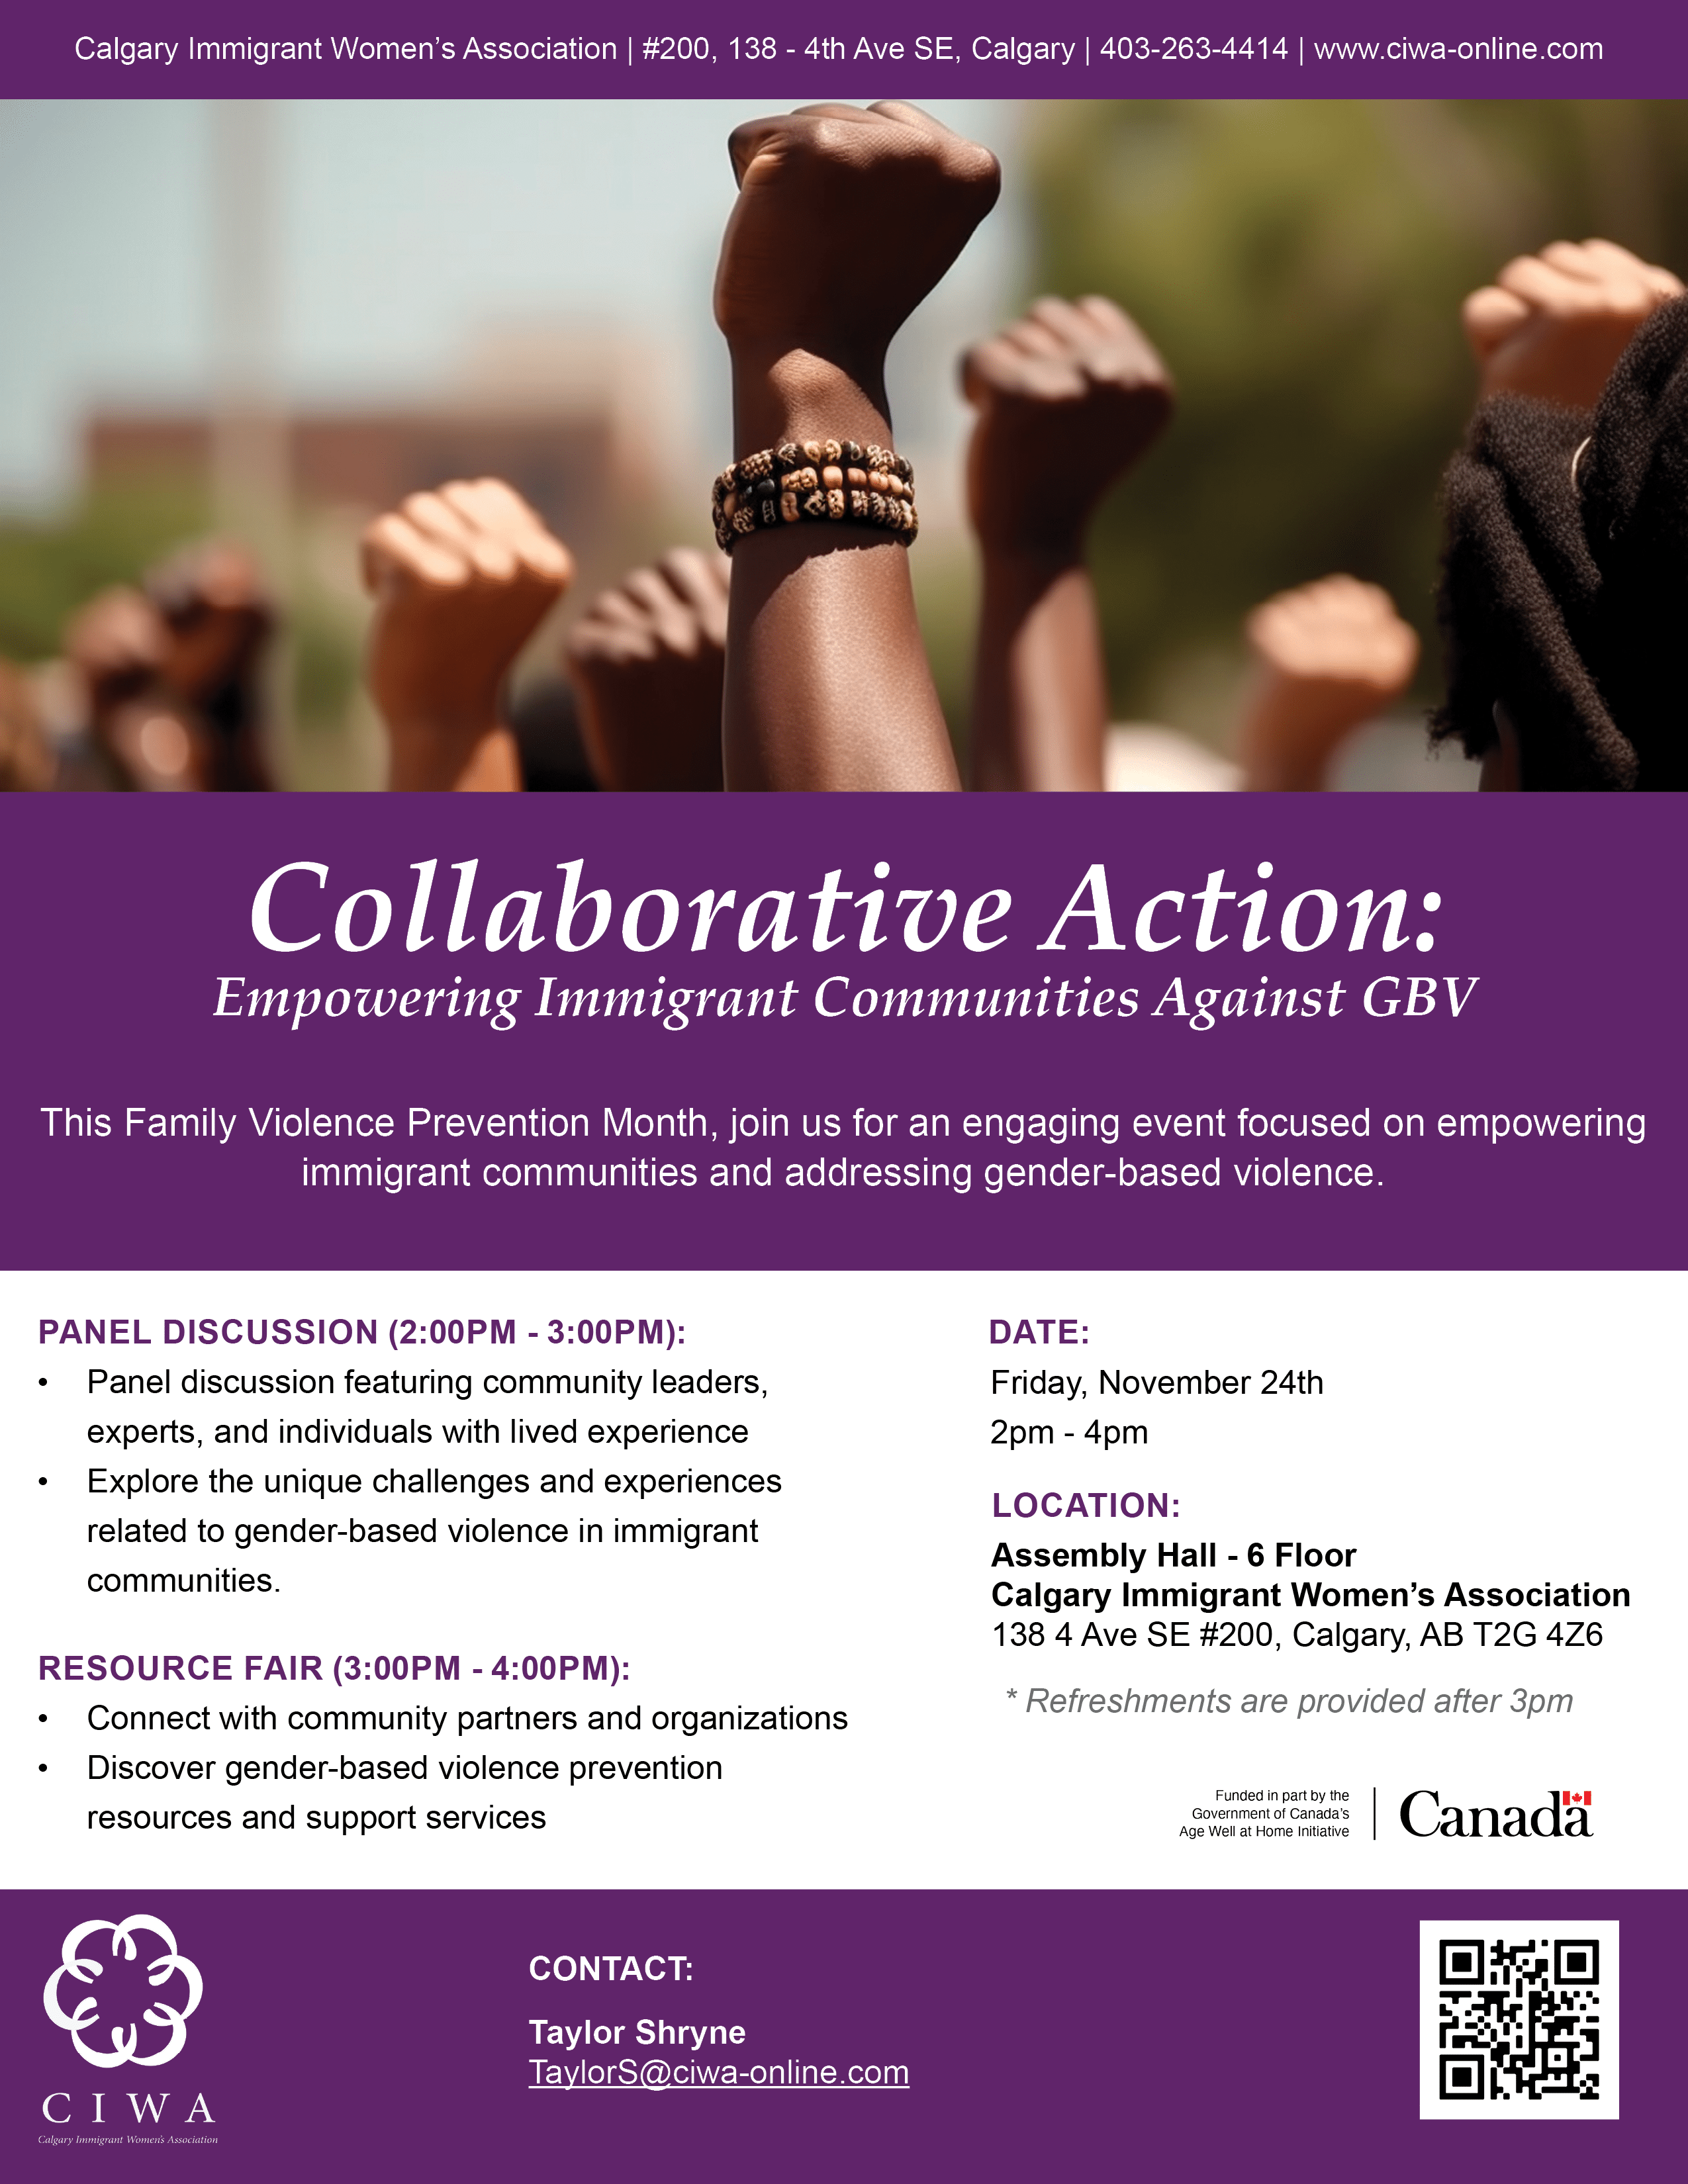 Collaborative Action: Empowering Immigrant Communities Against GBV Resource Fair and Symposium